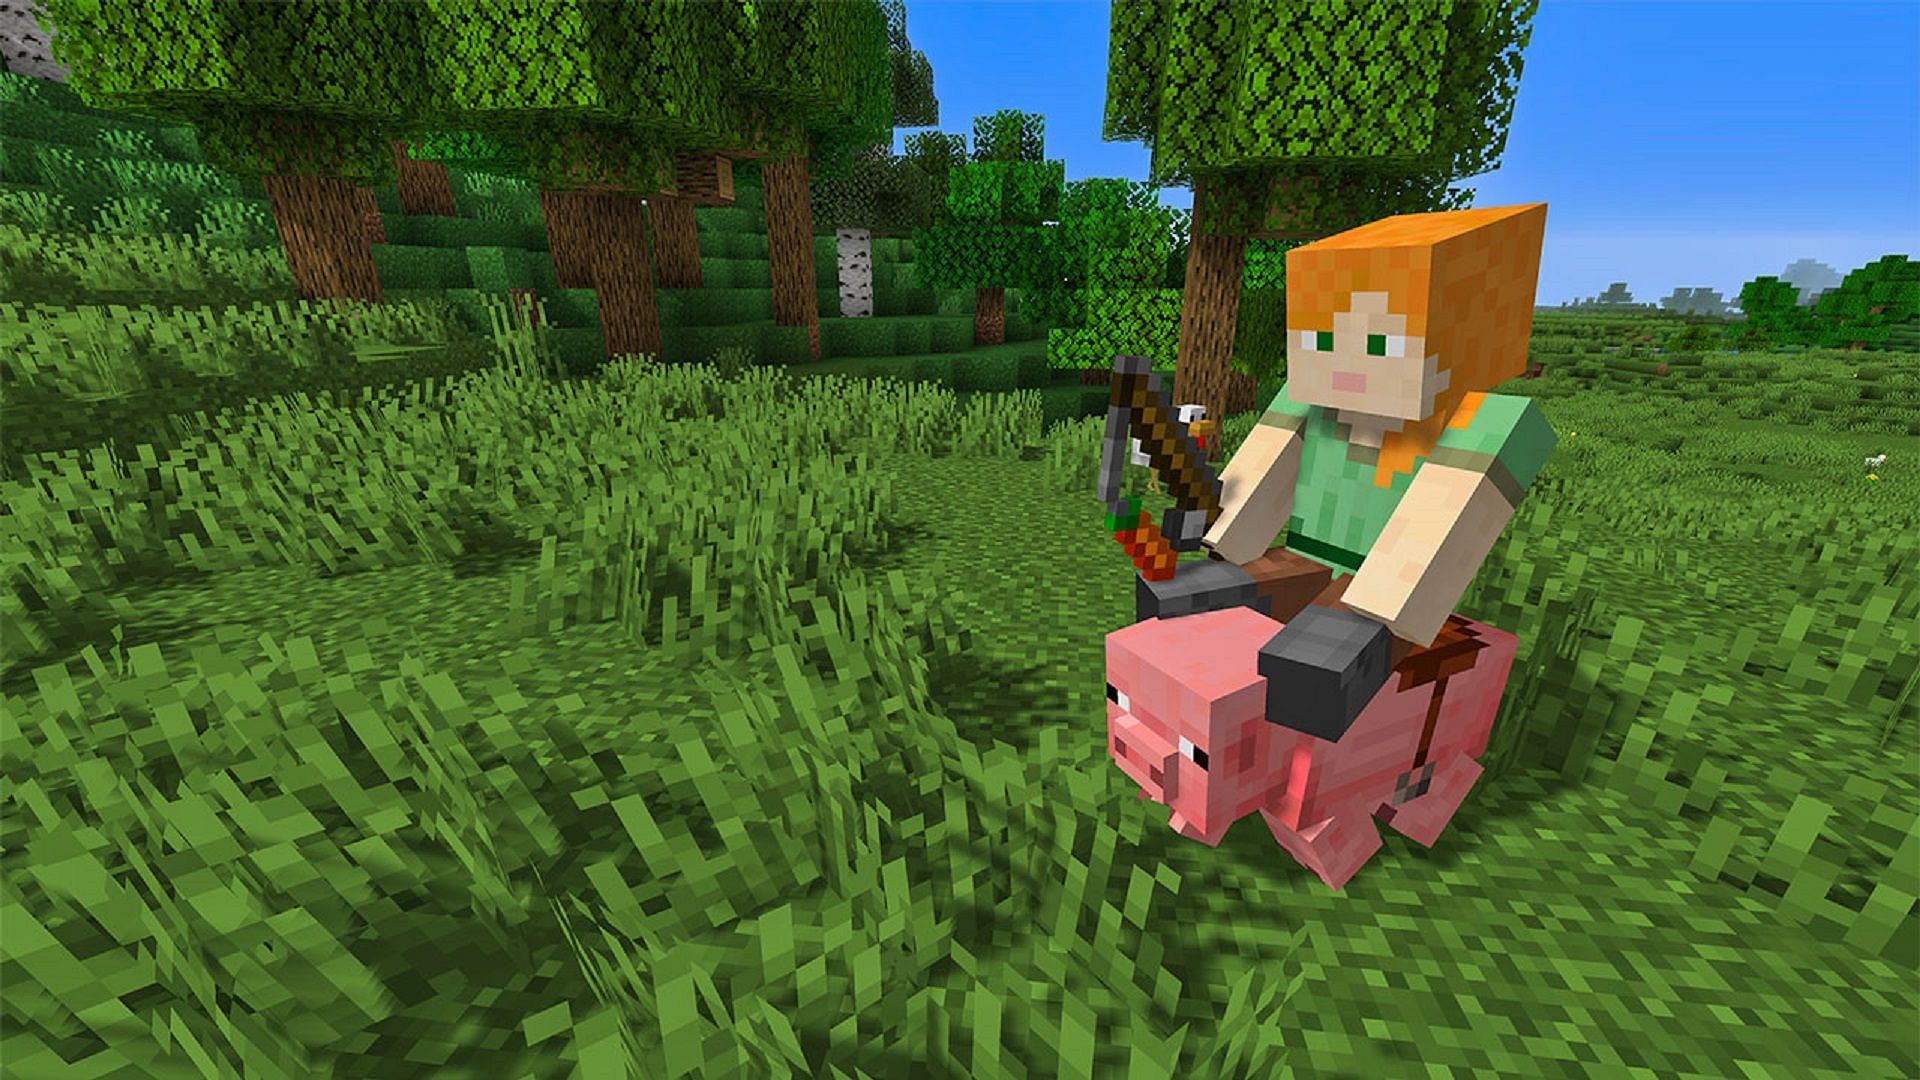 Alex riding a pig with a carrot on a stick for steering (Image via Mojang)